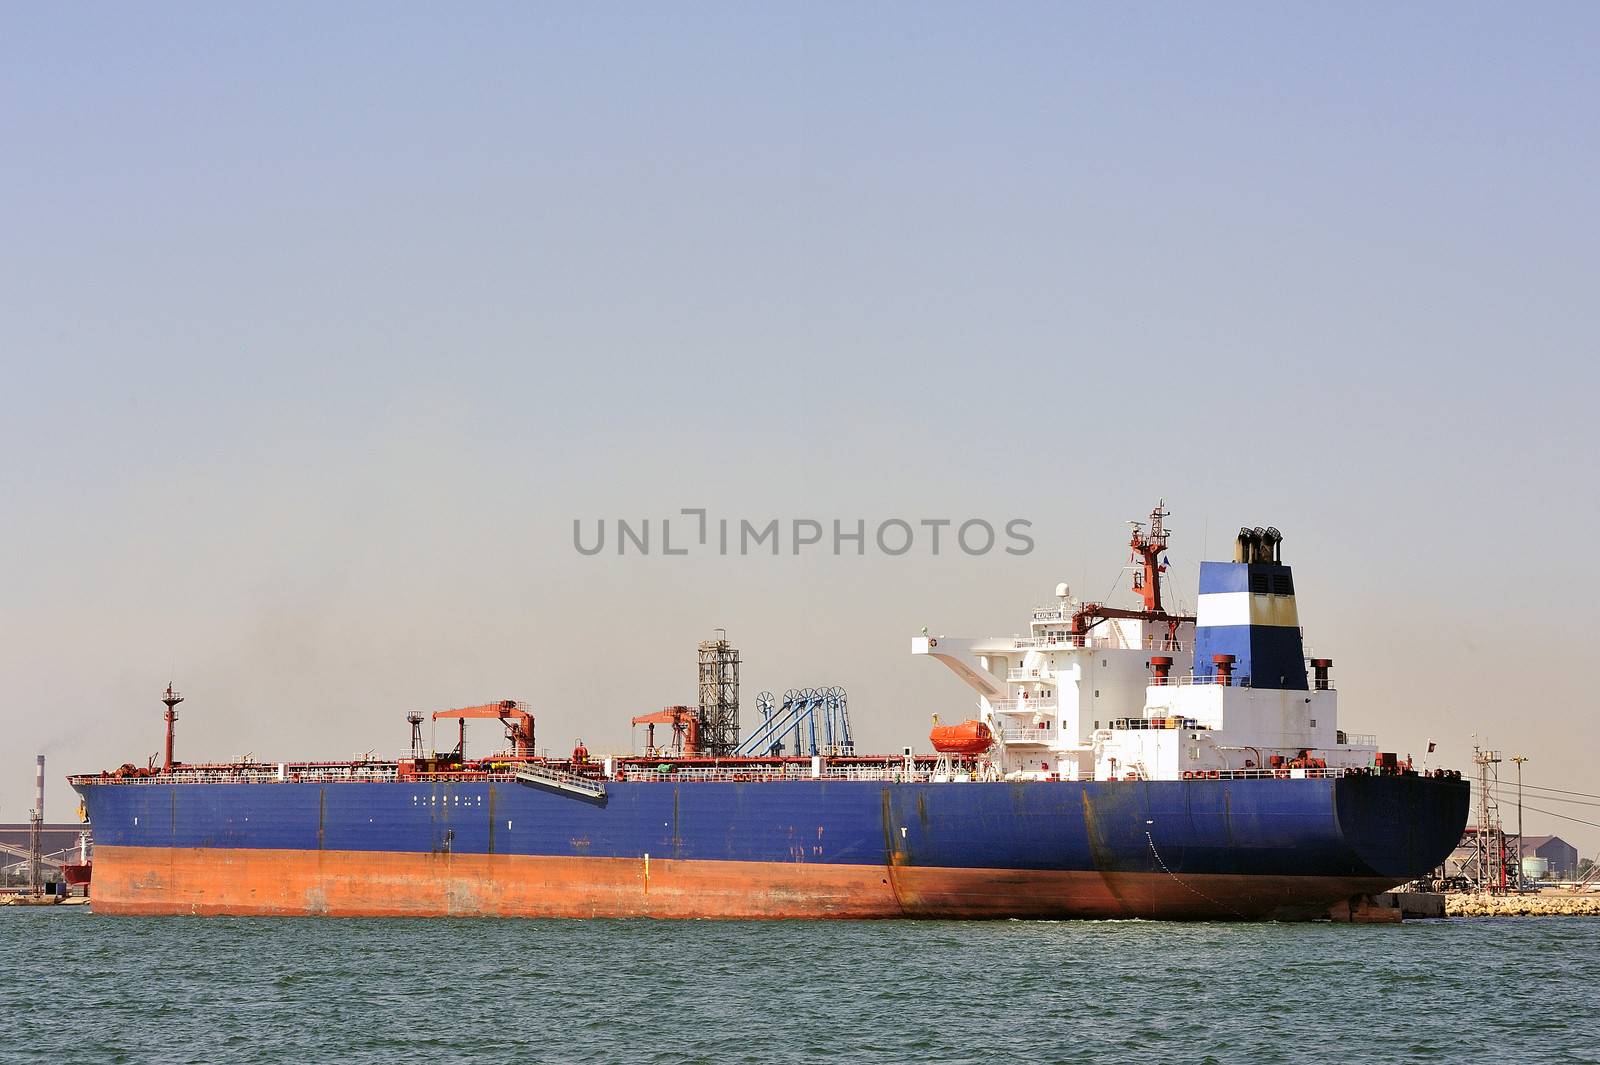 quay tanker to discharge by gillespaire